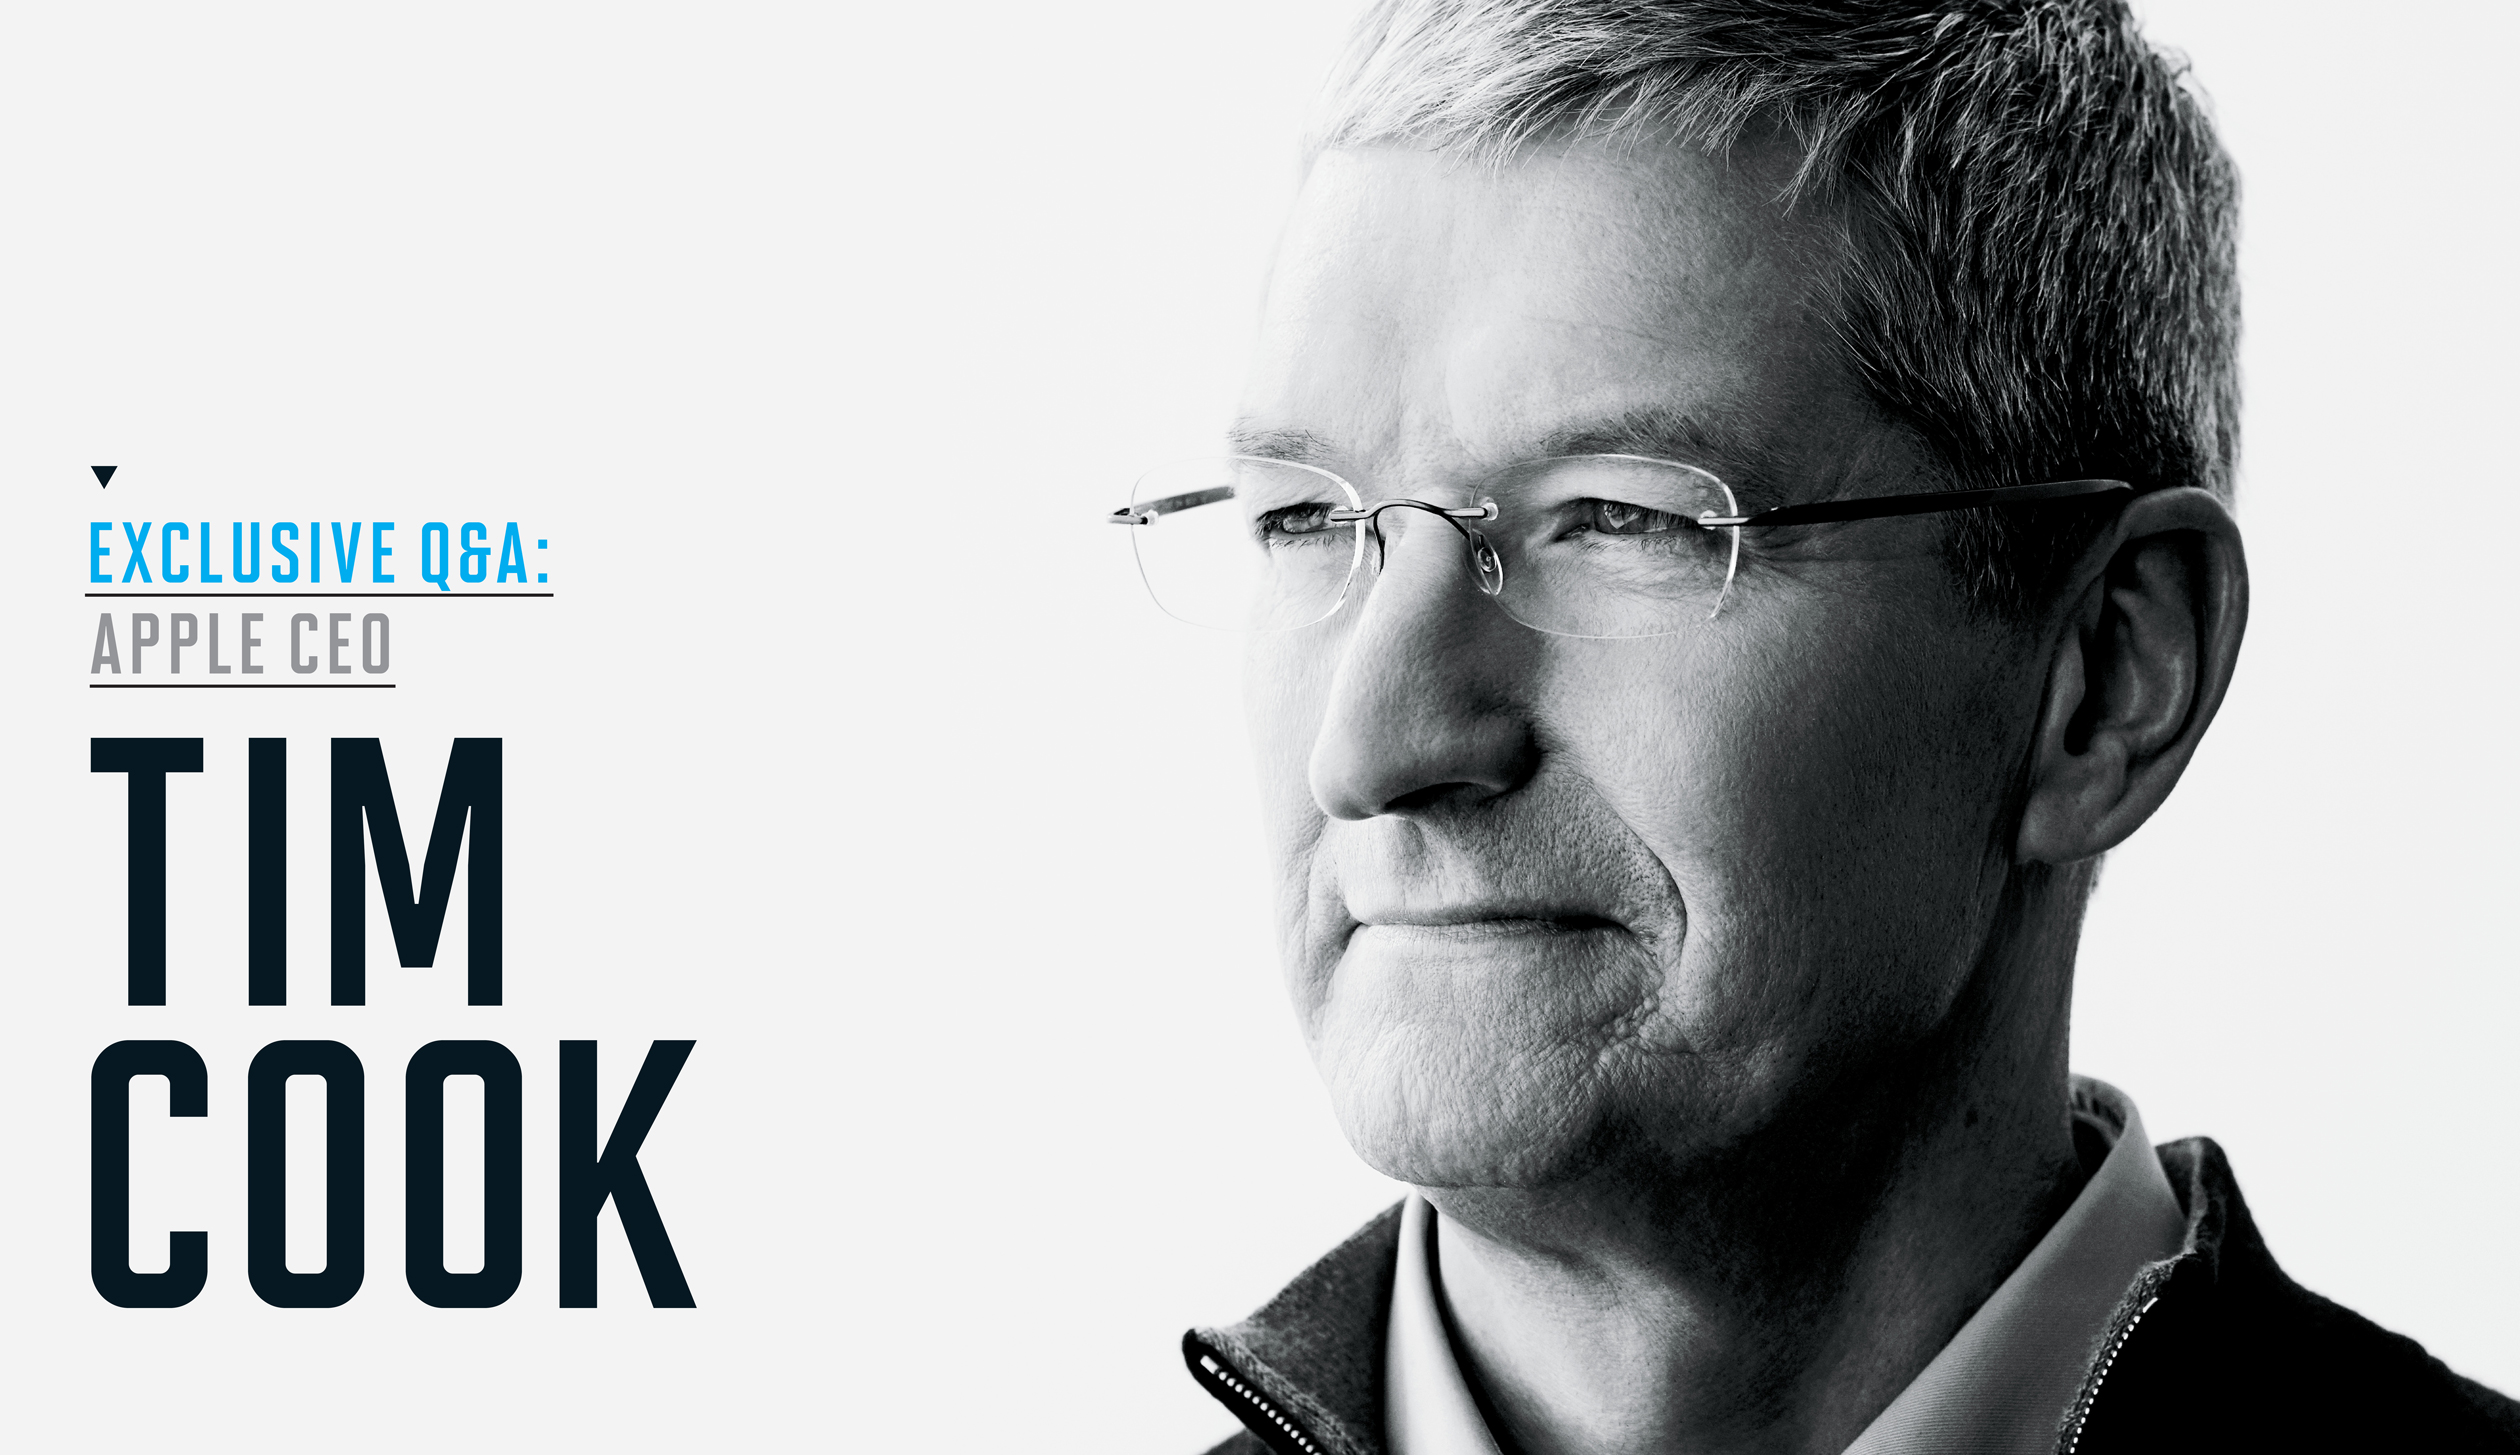 Tim Cook is the CEO of which company?